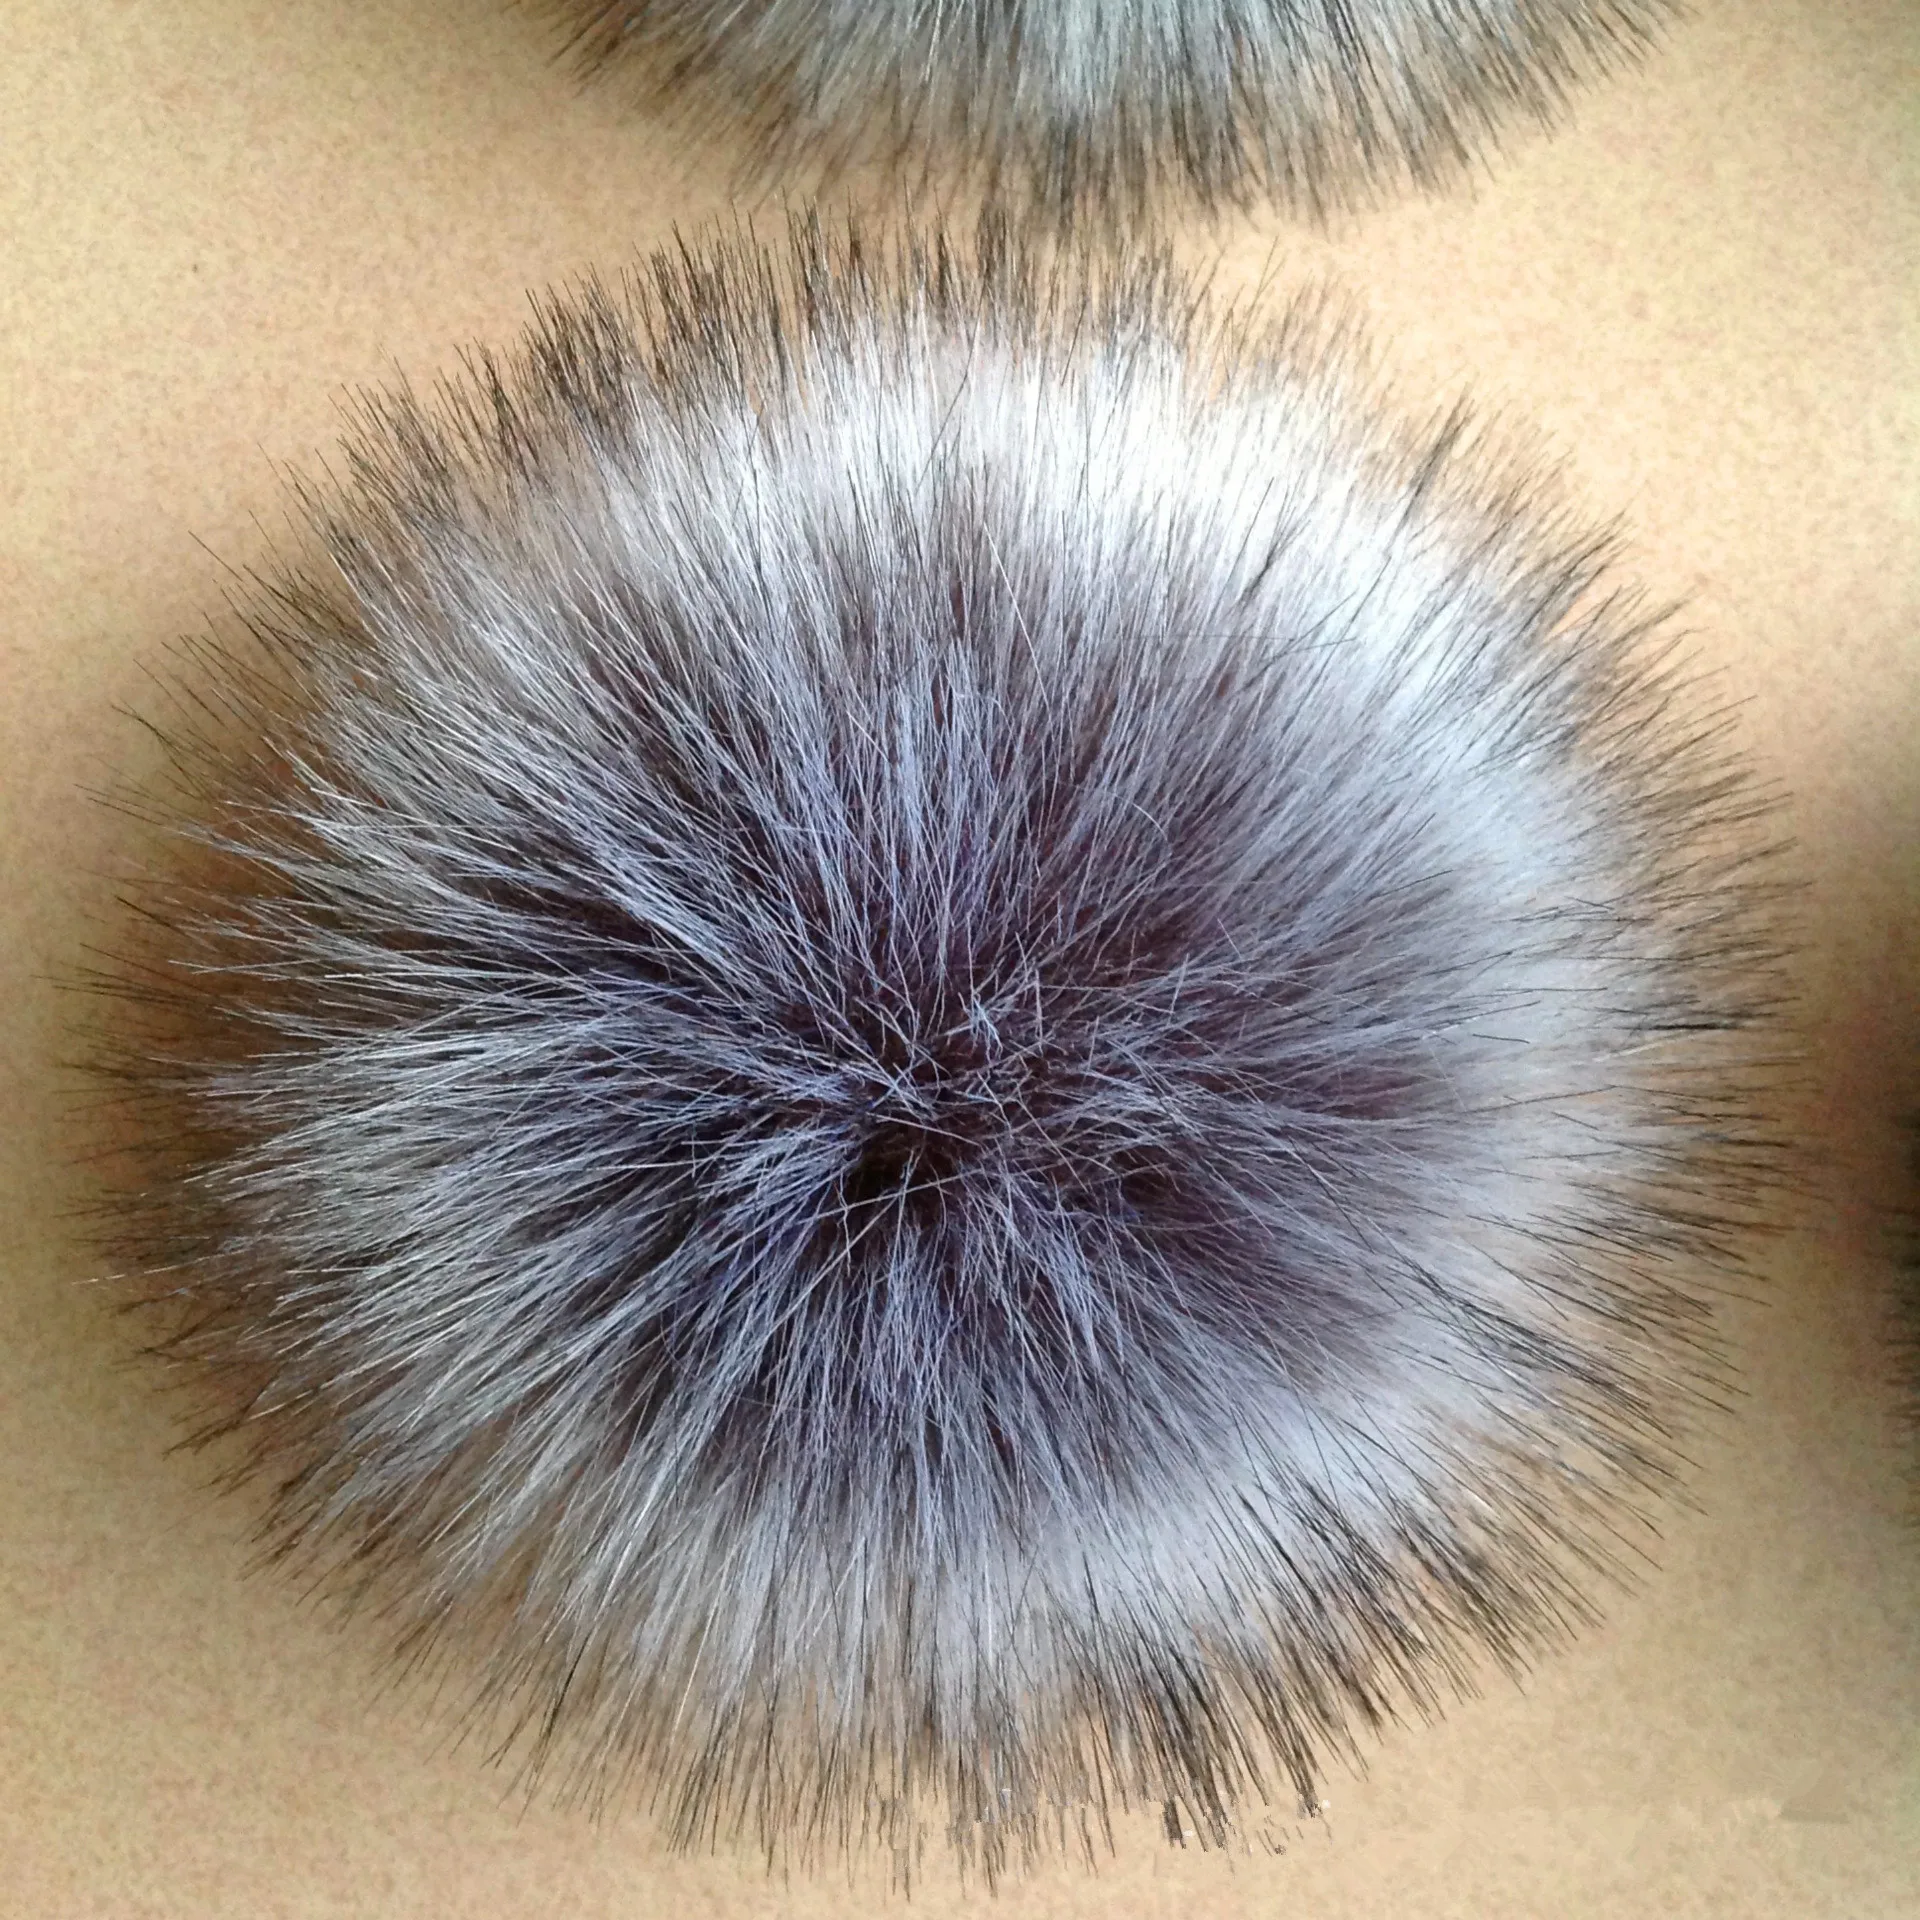 
Factory direct supply customized size fluffy faux or fake Silver Fox fur pom poms 